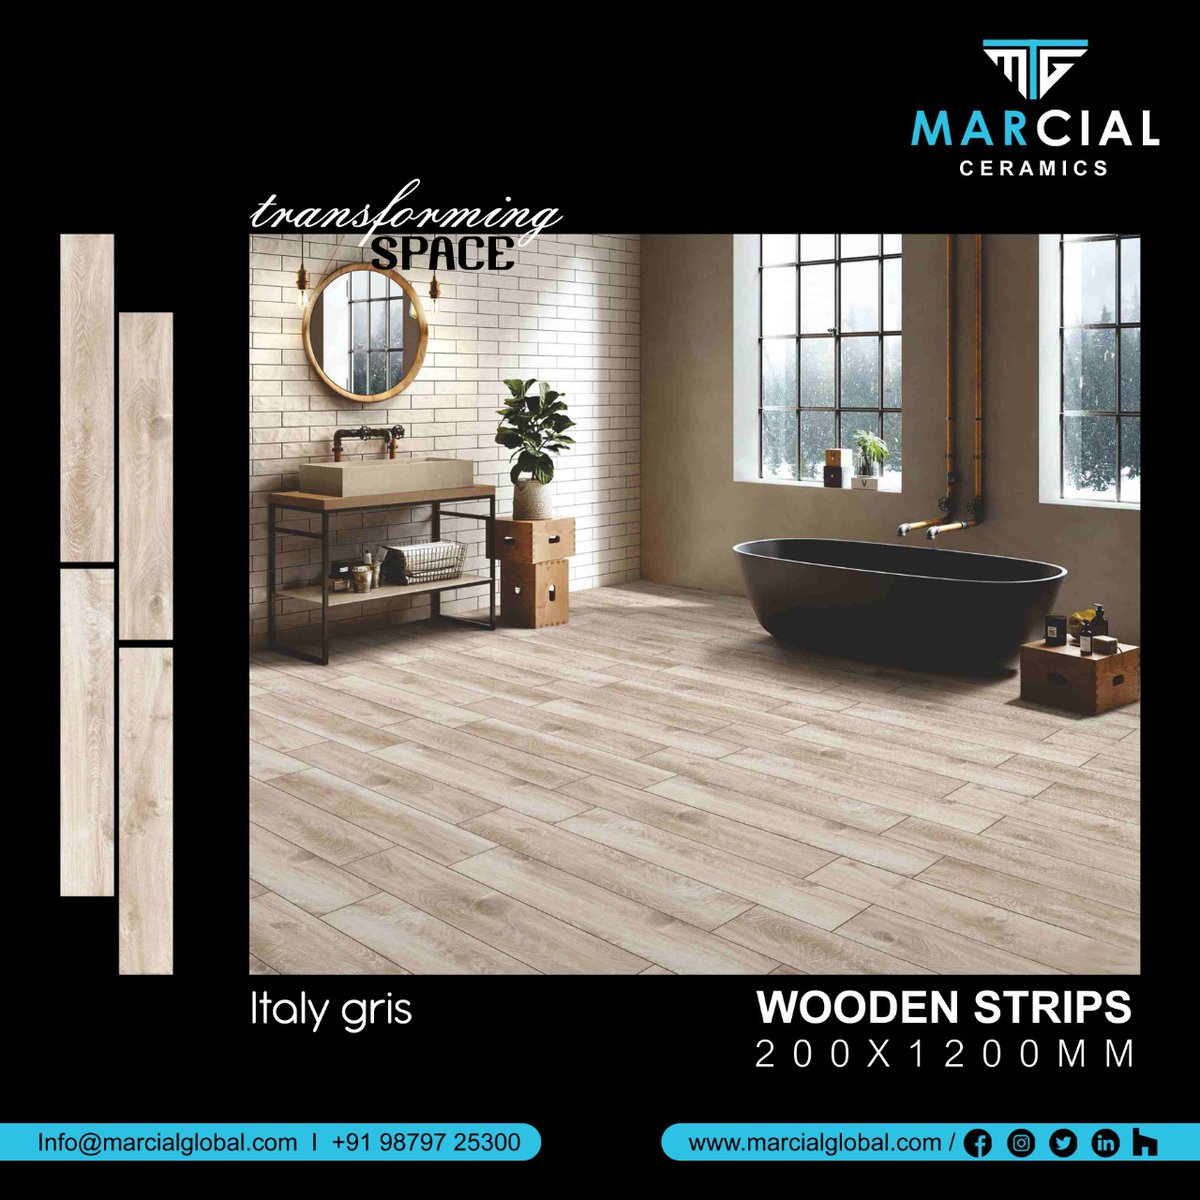 Wood look porcelain tiles, in 200x1200mm size is perfect for your living area. Check out more at marcialglobal.com
#porcelaintiles
#tiles
#woodlooktiles
#ceramictiles
#interiordesign
#livingarea
#homedecor
#manufacturer
#exporter
#madeinindia
#marcialglobal